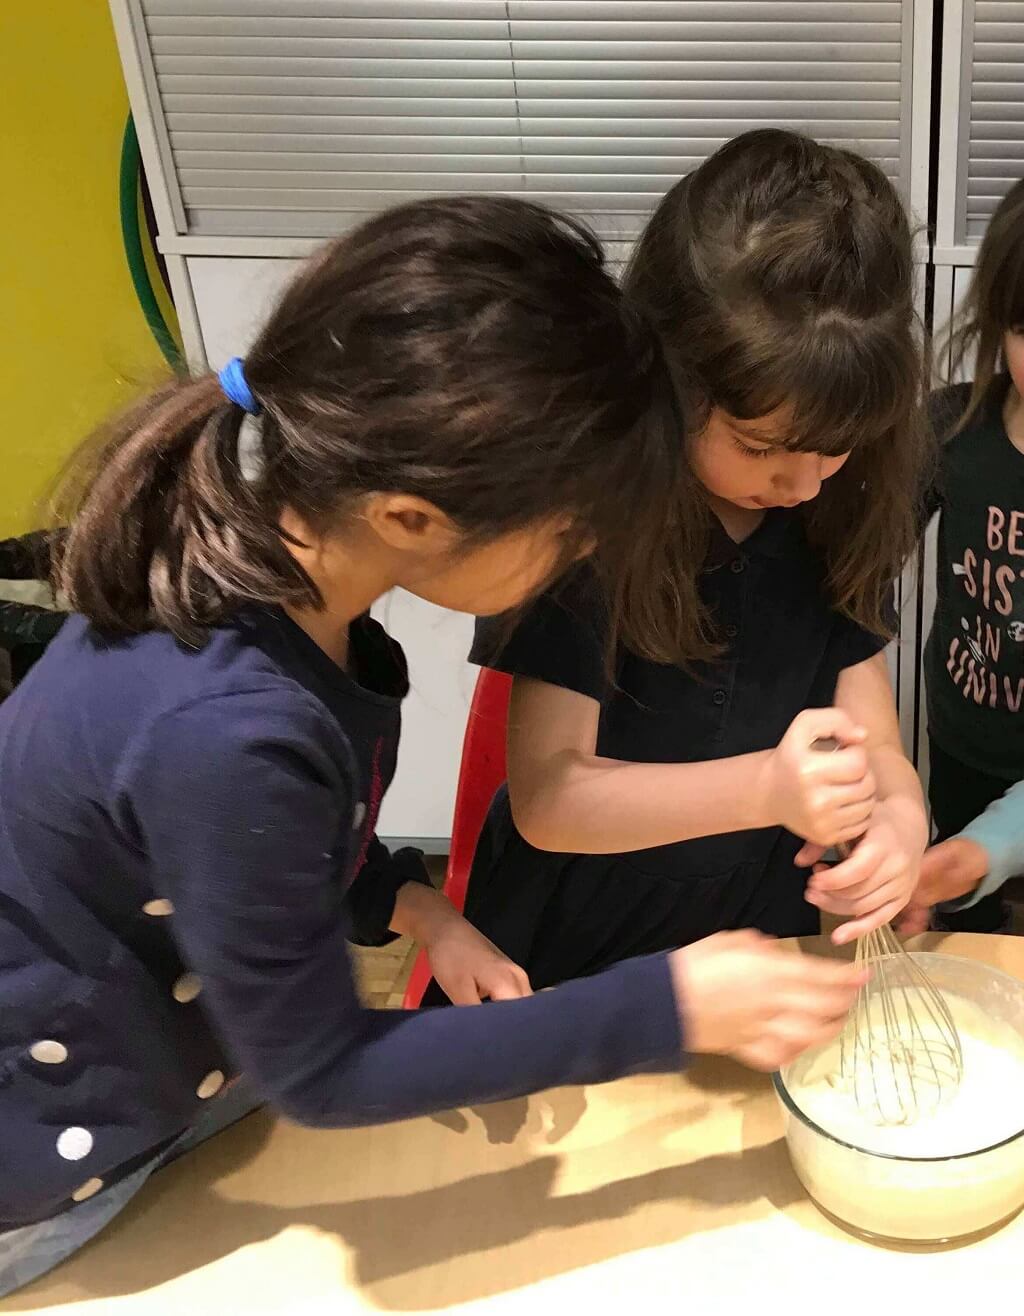 Three girls are making a cake together.